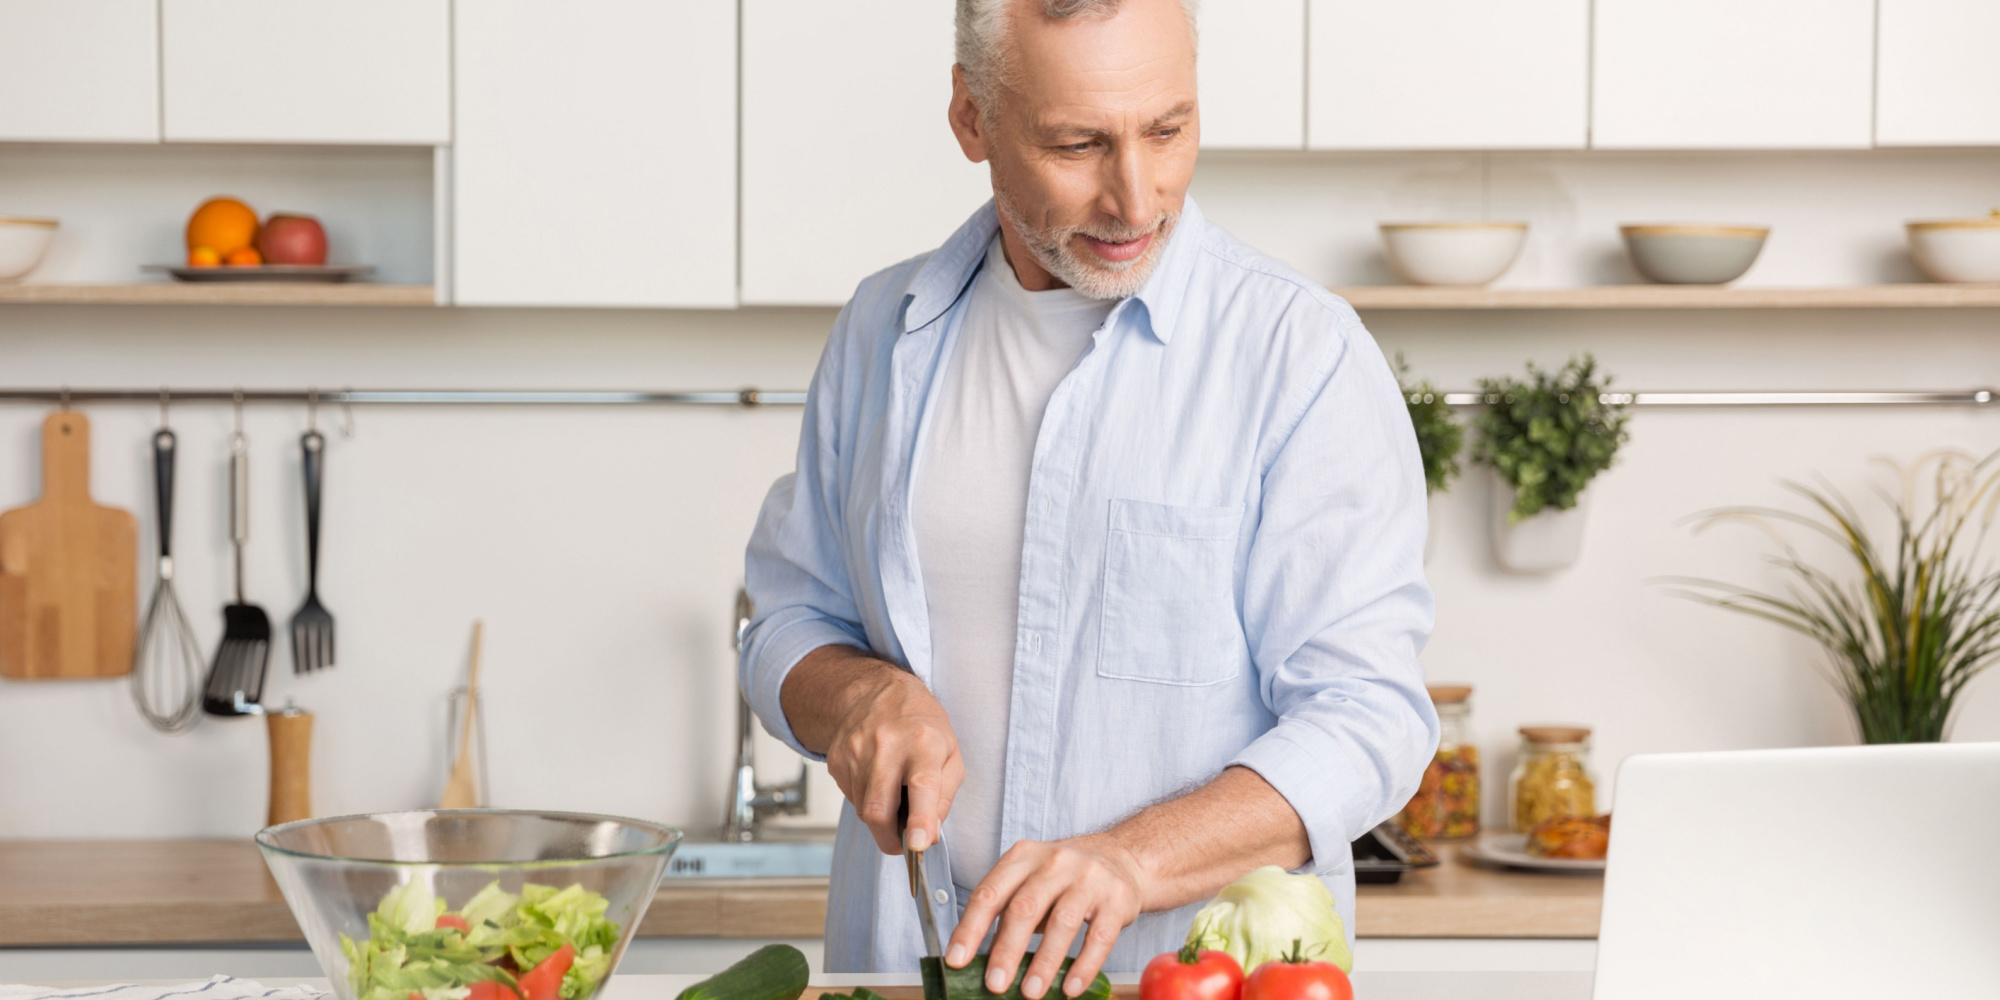 3 Tips for Men Over 40 to Help Lose Weight